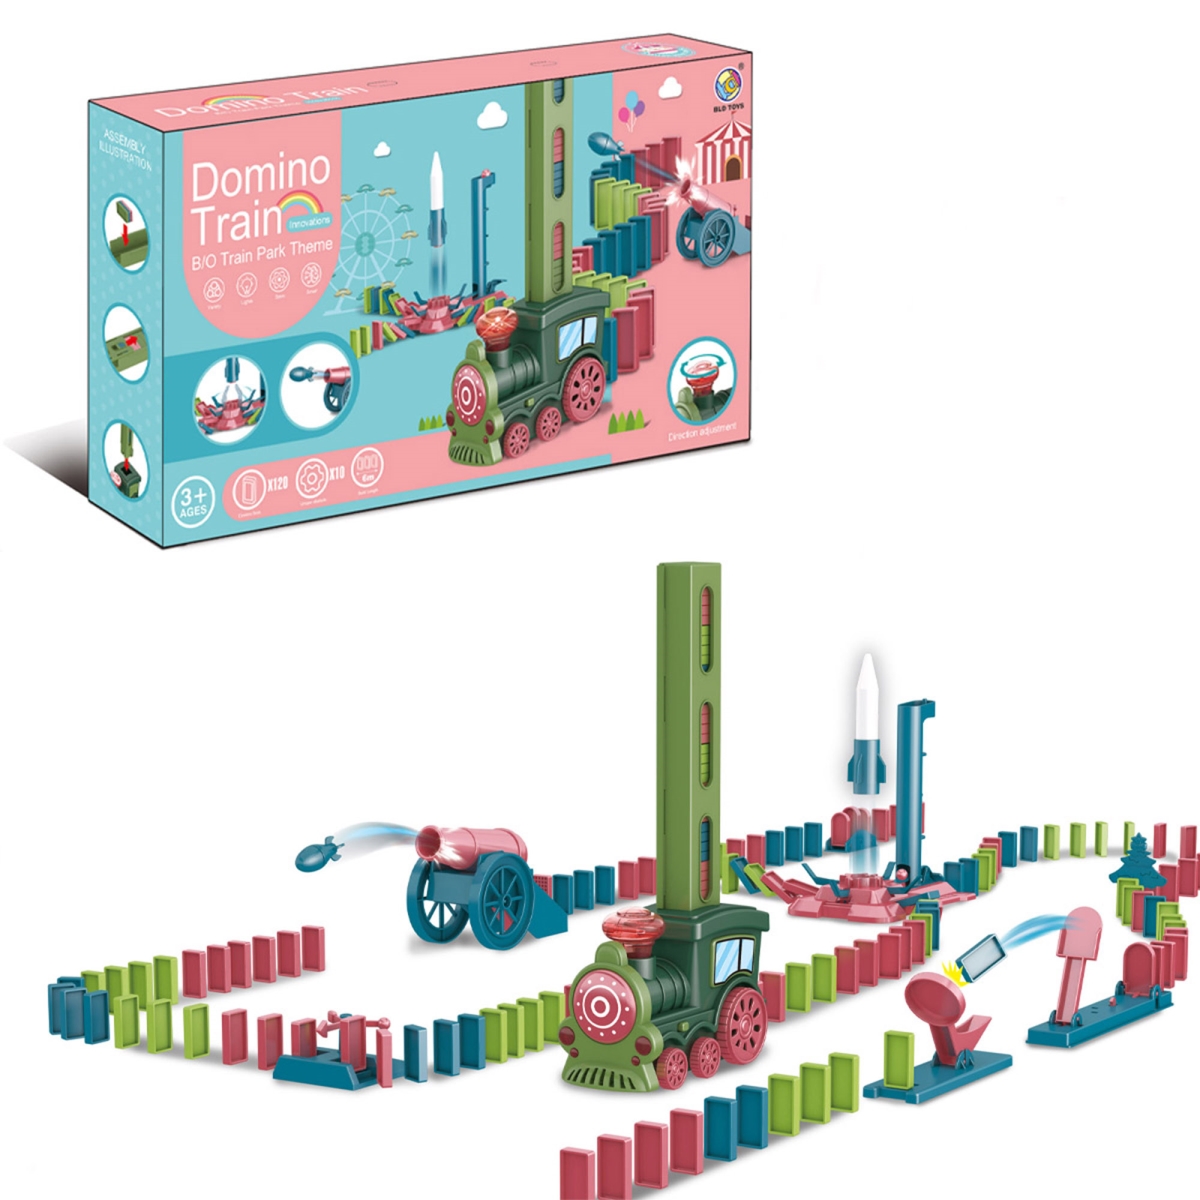 Picture of Zummy FS1155-M2 Domino Train Park Set with Lights and Sound - 120 Pieces